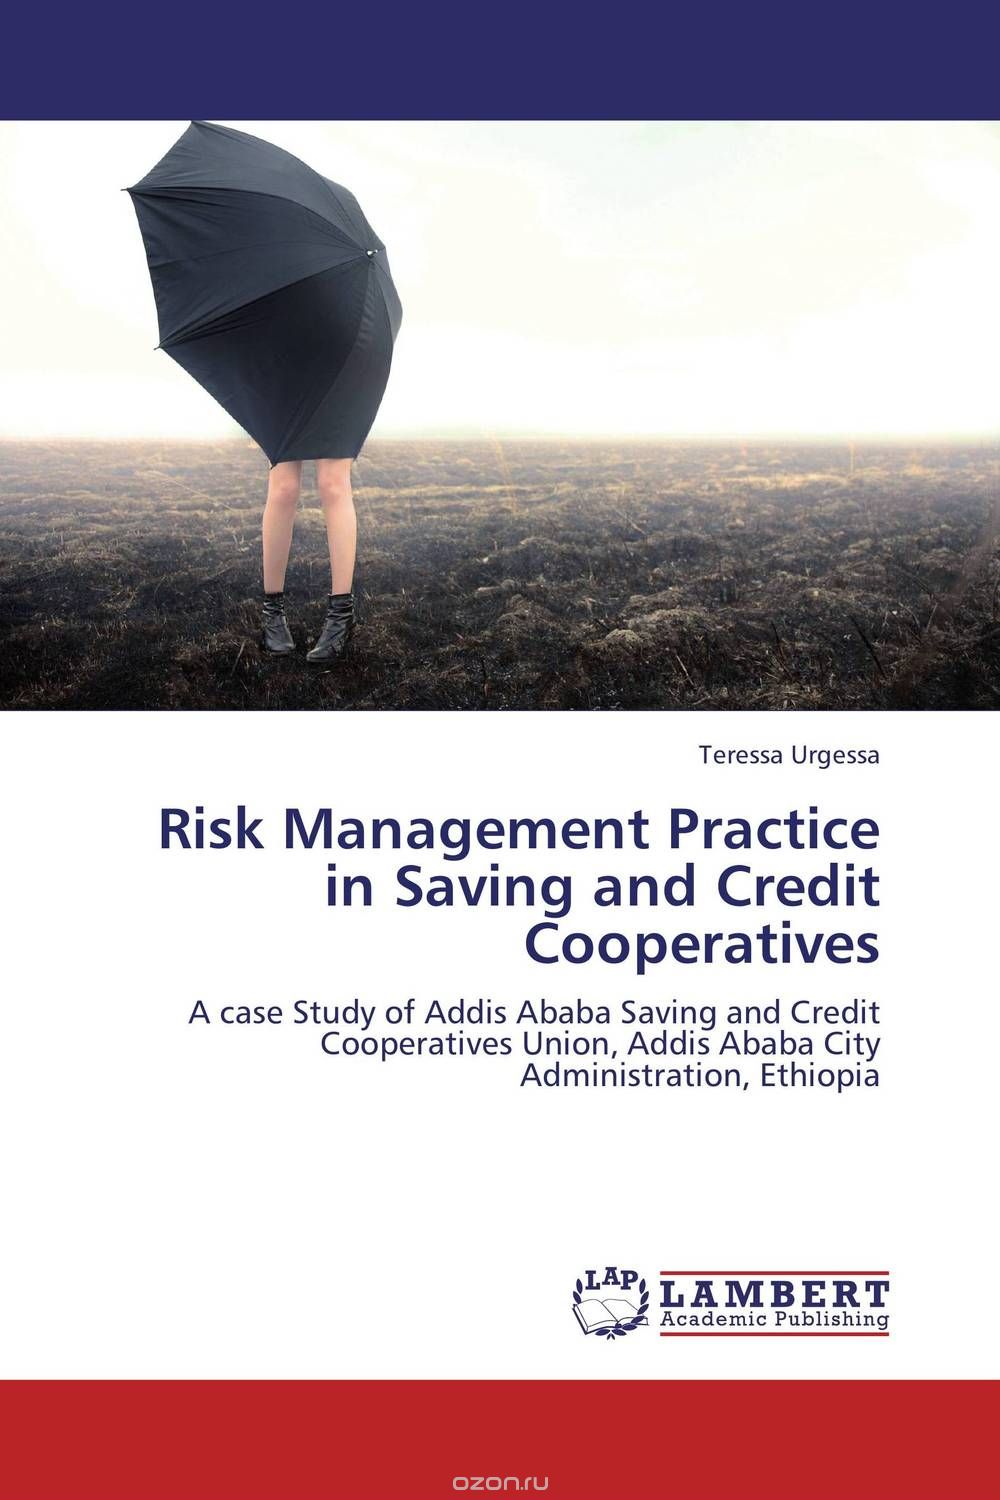 Risk Management Practice in Saving and Credit Cooperatives